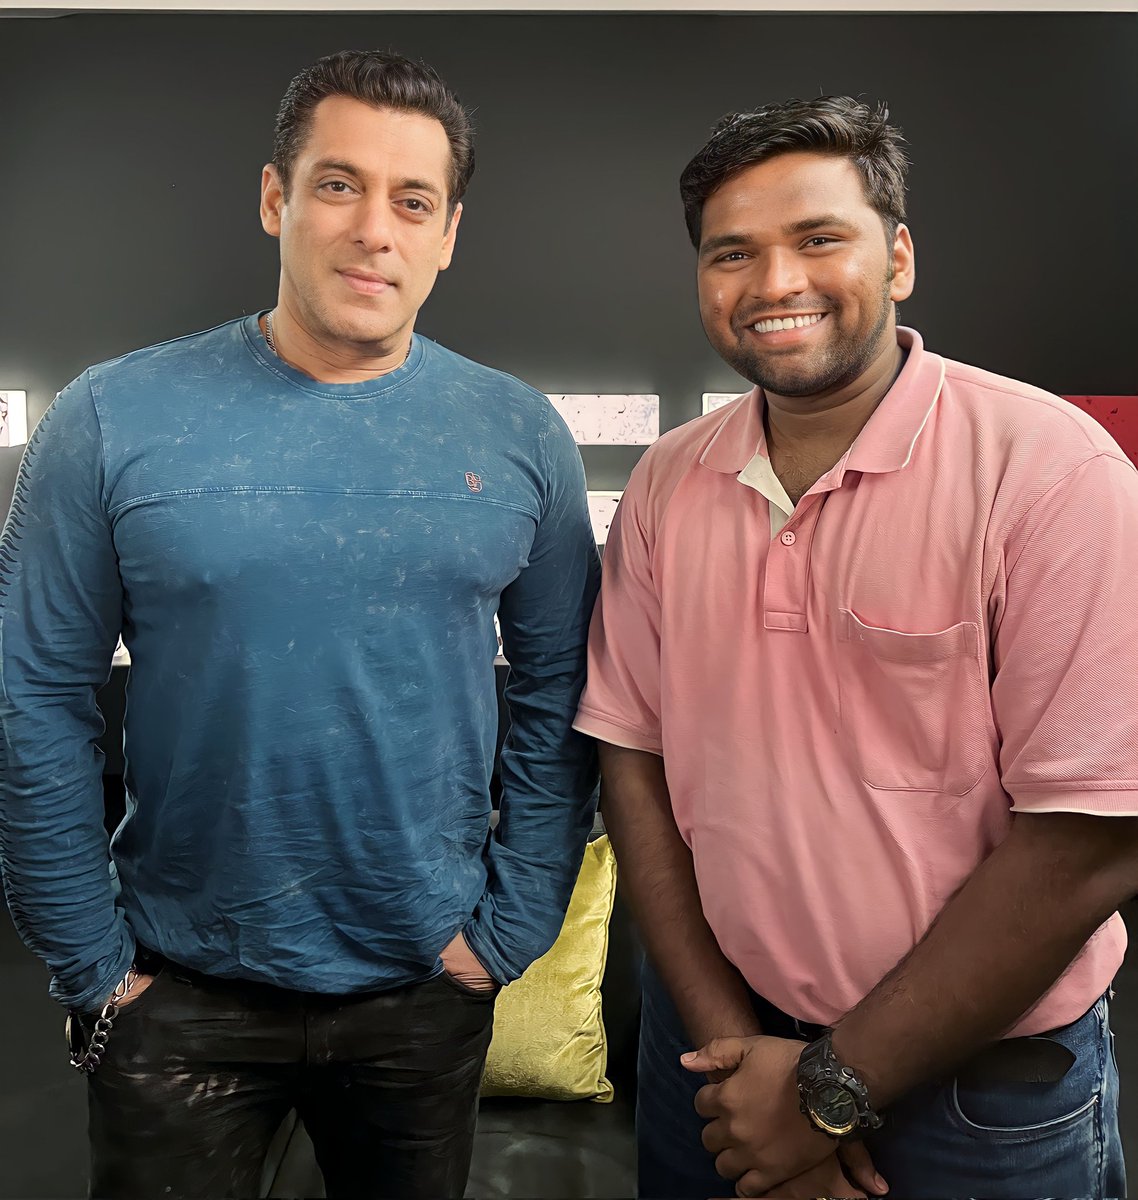 Finally The Day Has Arrived Clicked with Megastar of Bollywood @BeingSalmanKhan Post an Success Interview of his latest #Tiger3 aa it has Crossed 400Cr Over Boxoffice . . #SalmanKhan #SalmanaKhan #Salmankhanfans #SalmanKhan𓃵 #Salman #Tiger3Review #Tiger3